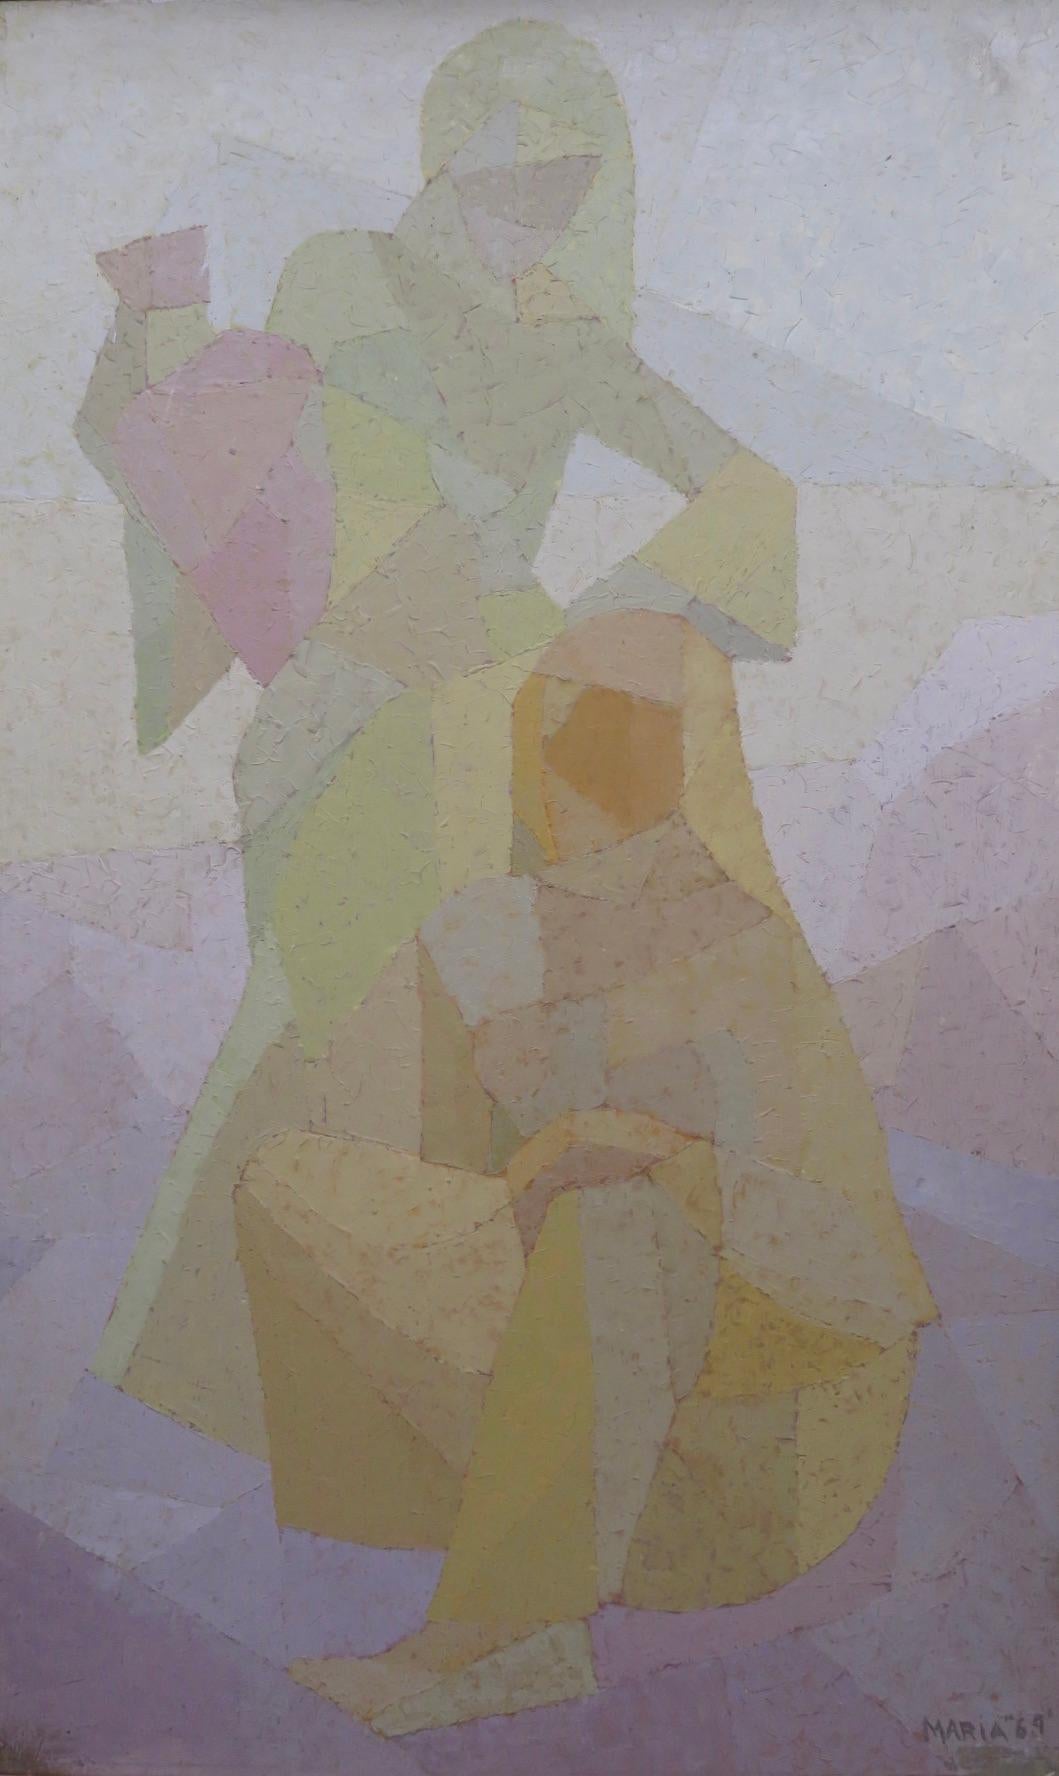 ARTIST: Maria Penn (1936-) American 
TITLE:  'Two Cubist Figures